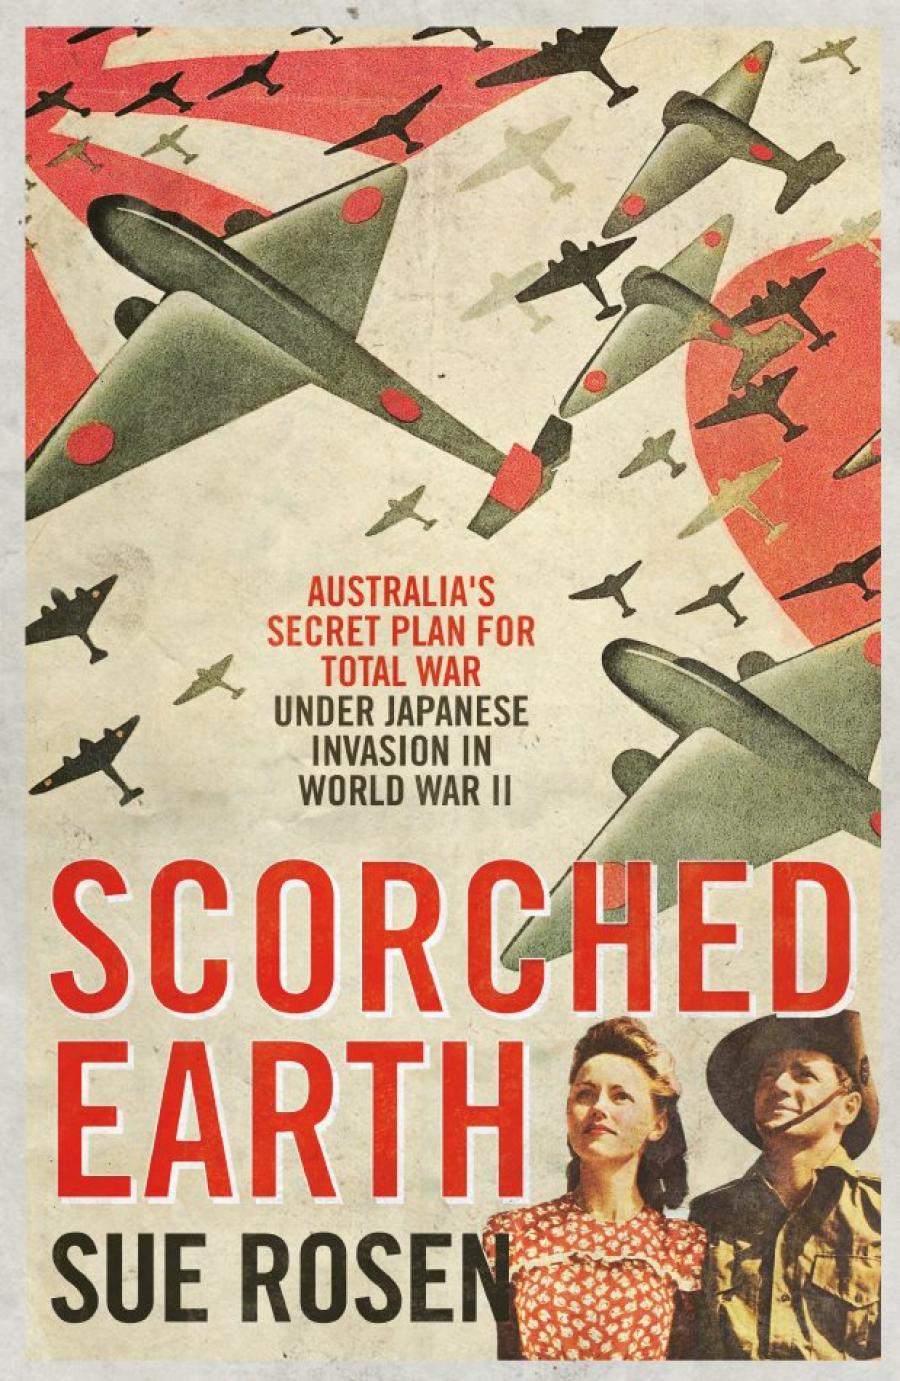 Military historian Dr Andrew Richardson reviews Scorched Earth